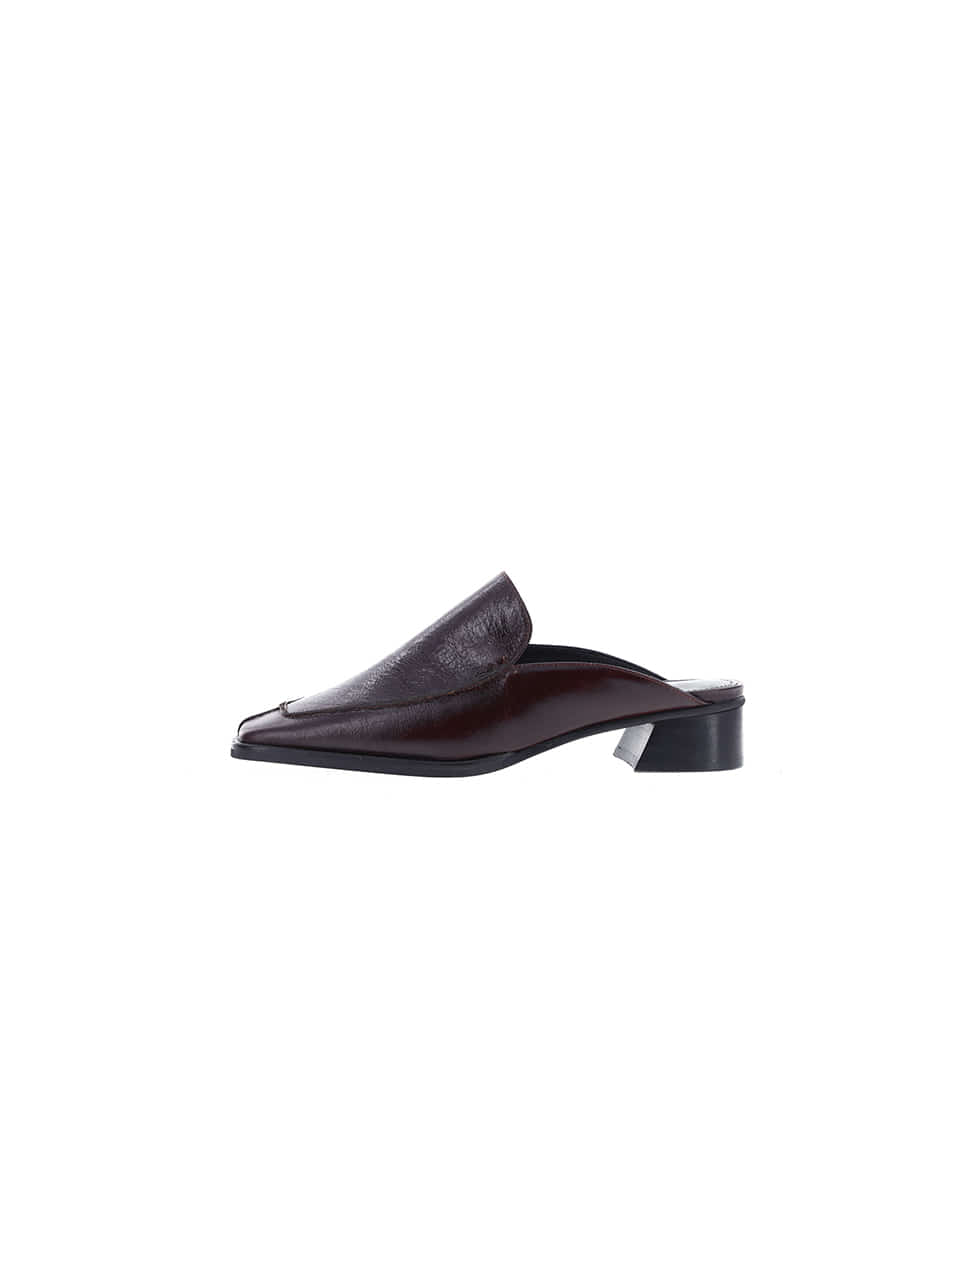 lin backless loafer_winebrown_21008